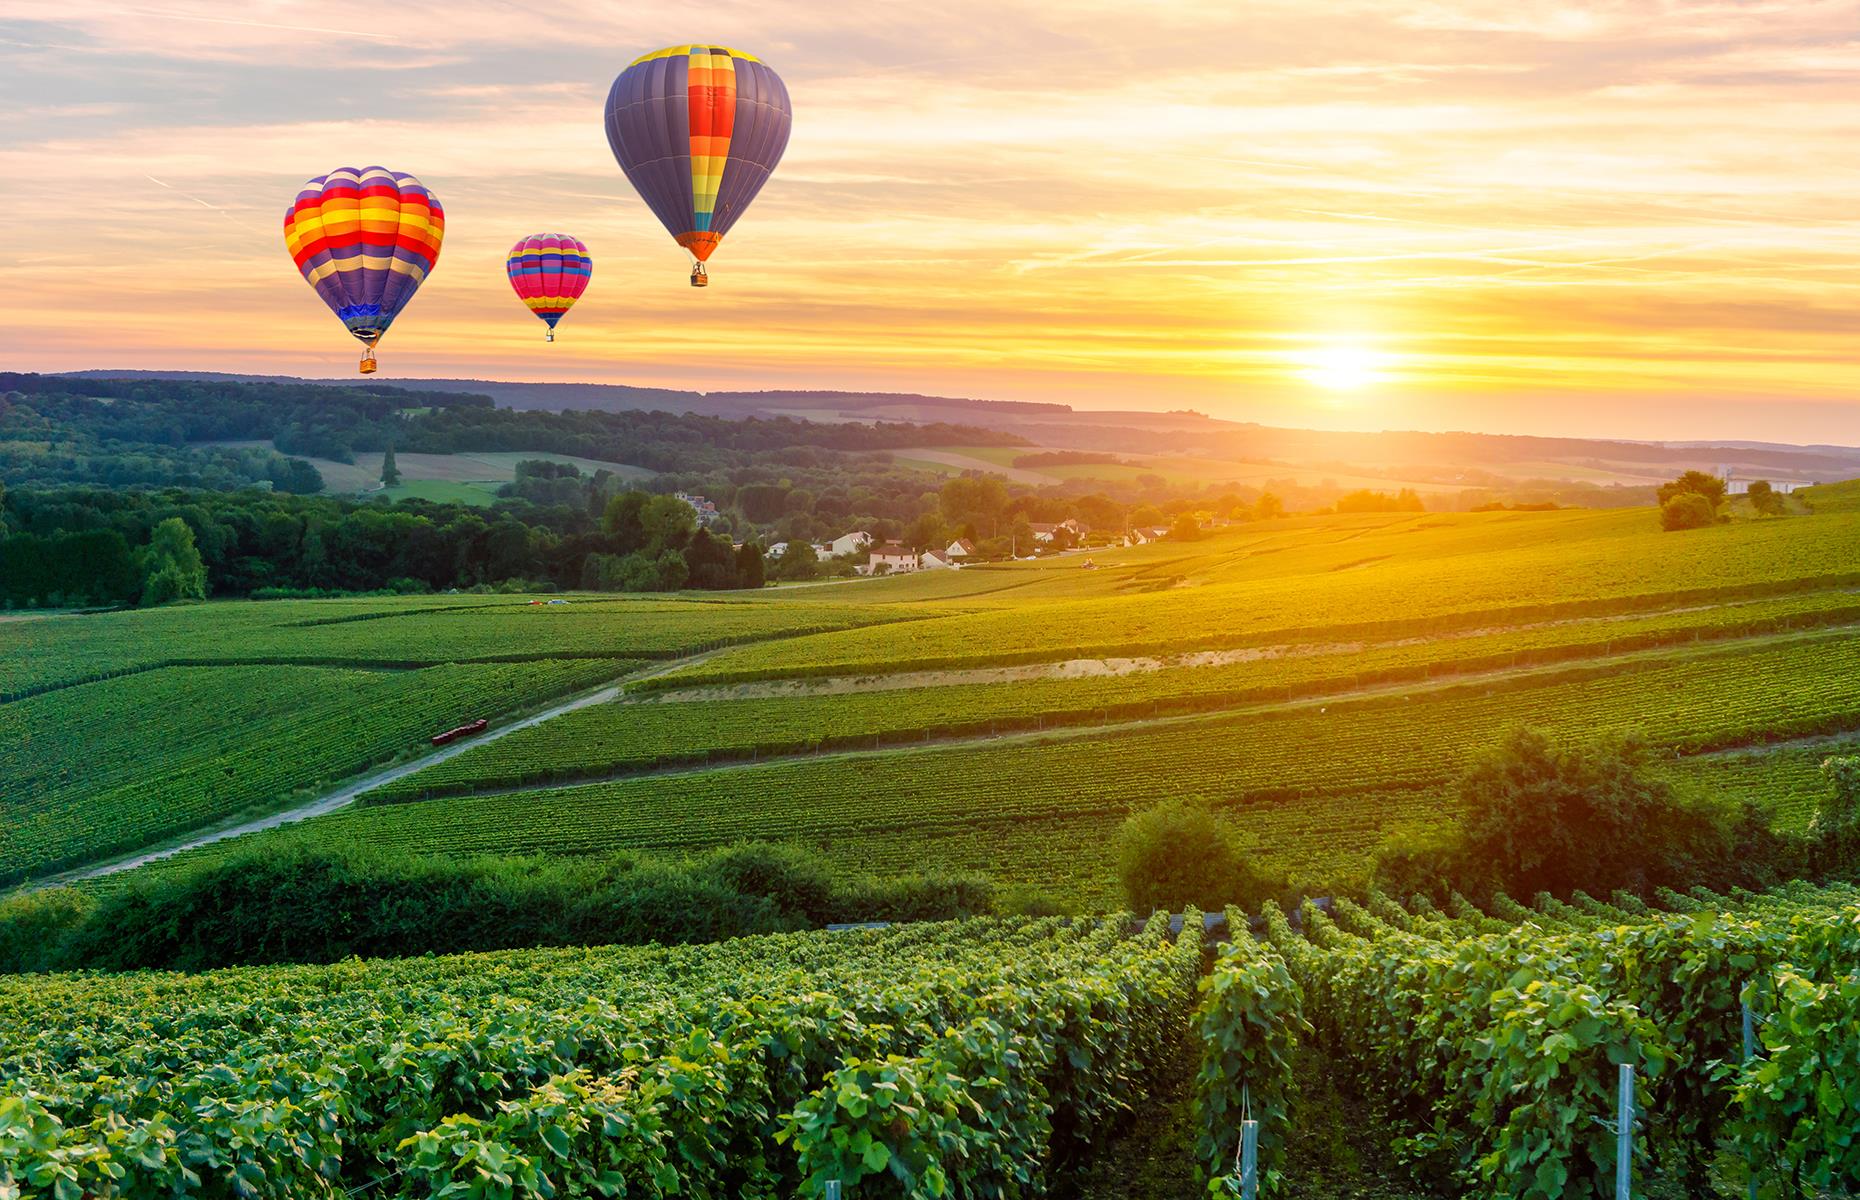 Plenty of balloon flights offer bubbles on board, but there may be no better experience than in the home of fizz itself. If you fancy taking luxury ballooning to the next level, hop into the basket of one of the many balloons that fly over the Champagne region in northeast France. Admire the sloping rows of vines from above, ideally at sunrise when a golden light makes the region even more beautiful, then set down in an open field and pop open some fizz to toast the day.